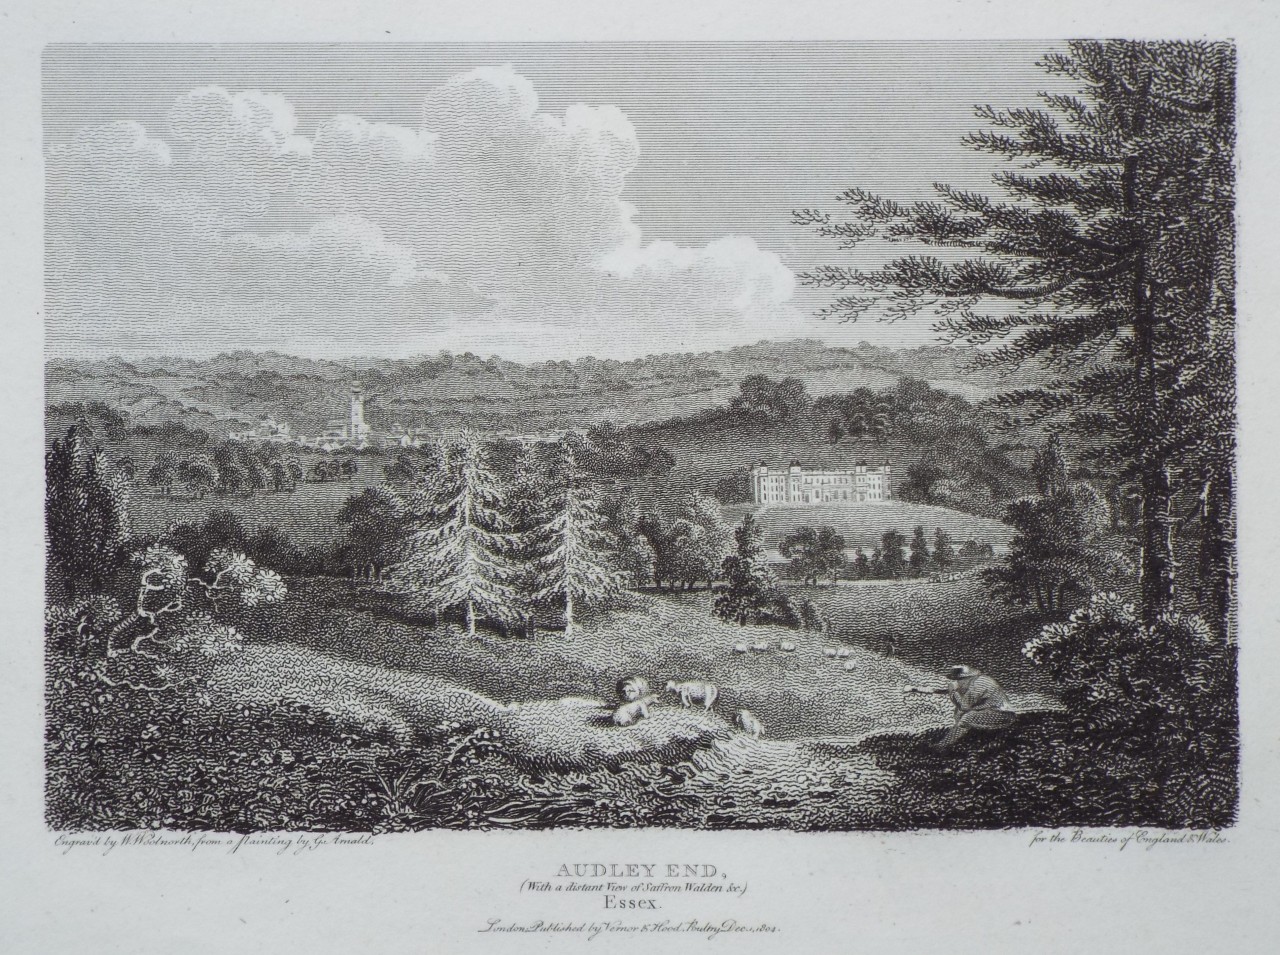 Print - Audley End, (With a distant view of Saffron Walden &c.) Essex. - Woolnoth